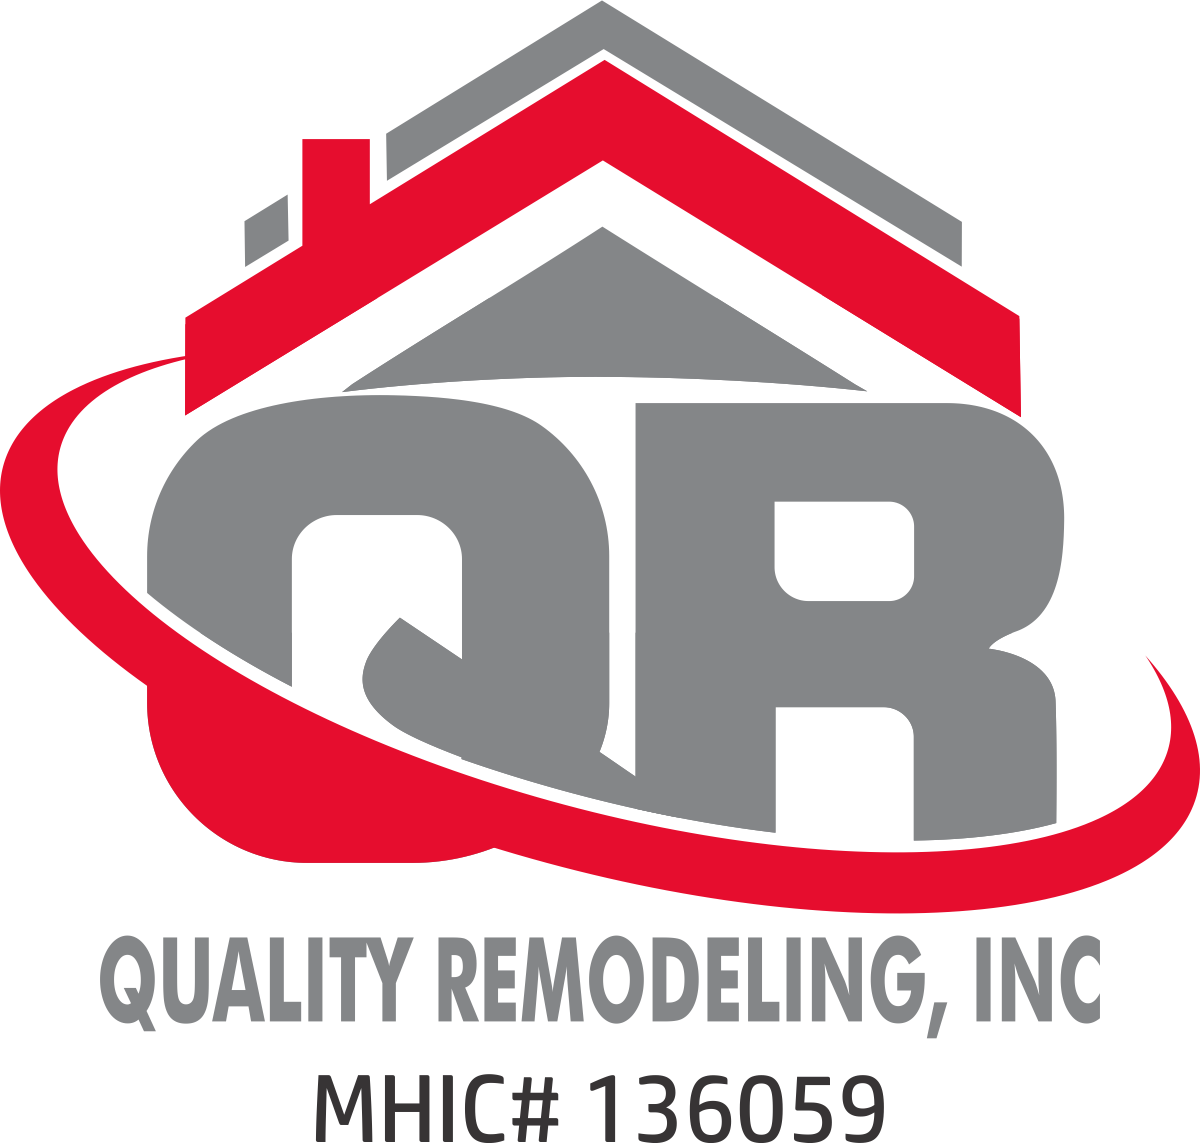 Quality Remodeling, Inc.